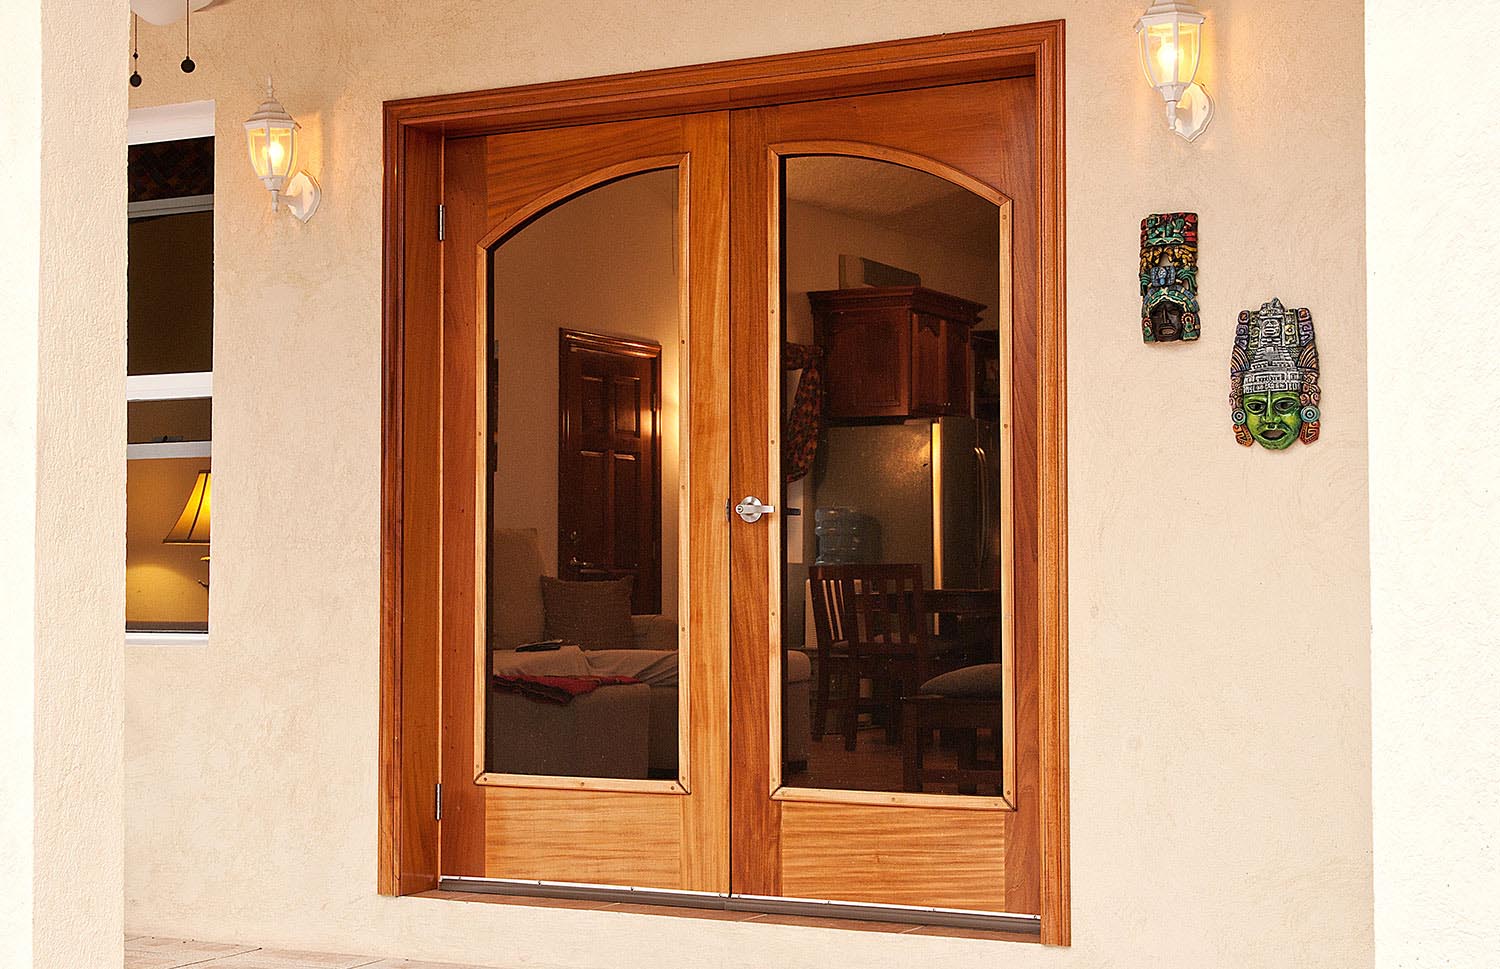 Arch top, full glass panel french door, figured mahogany